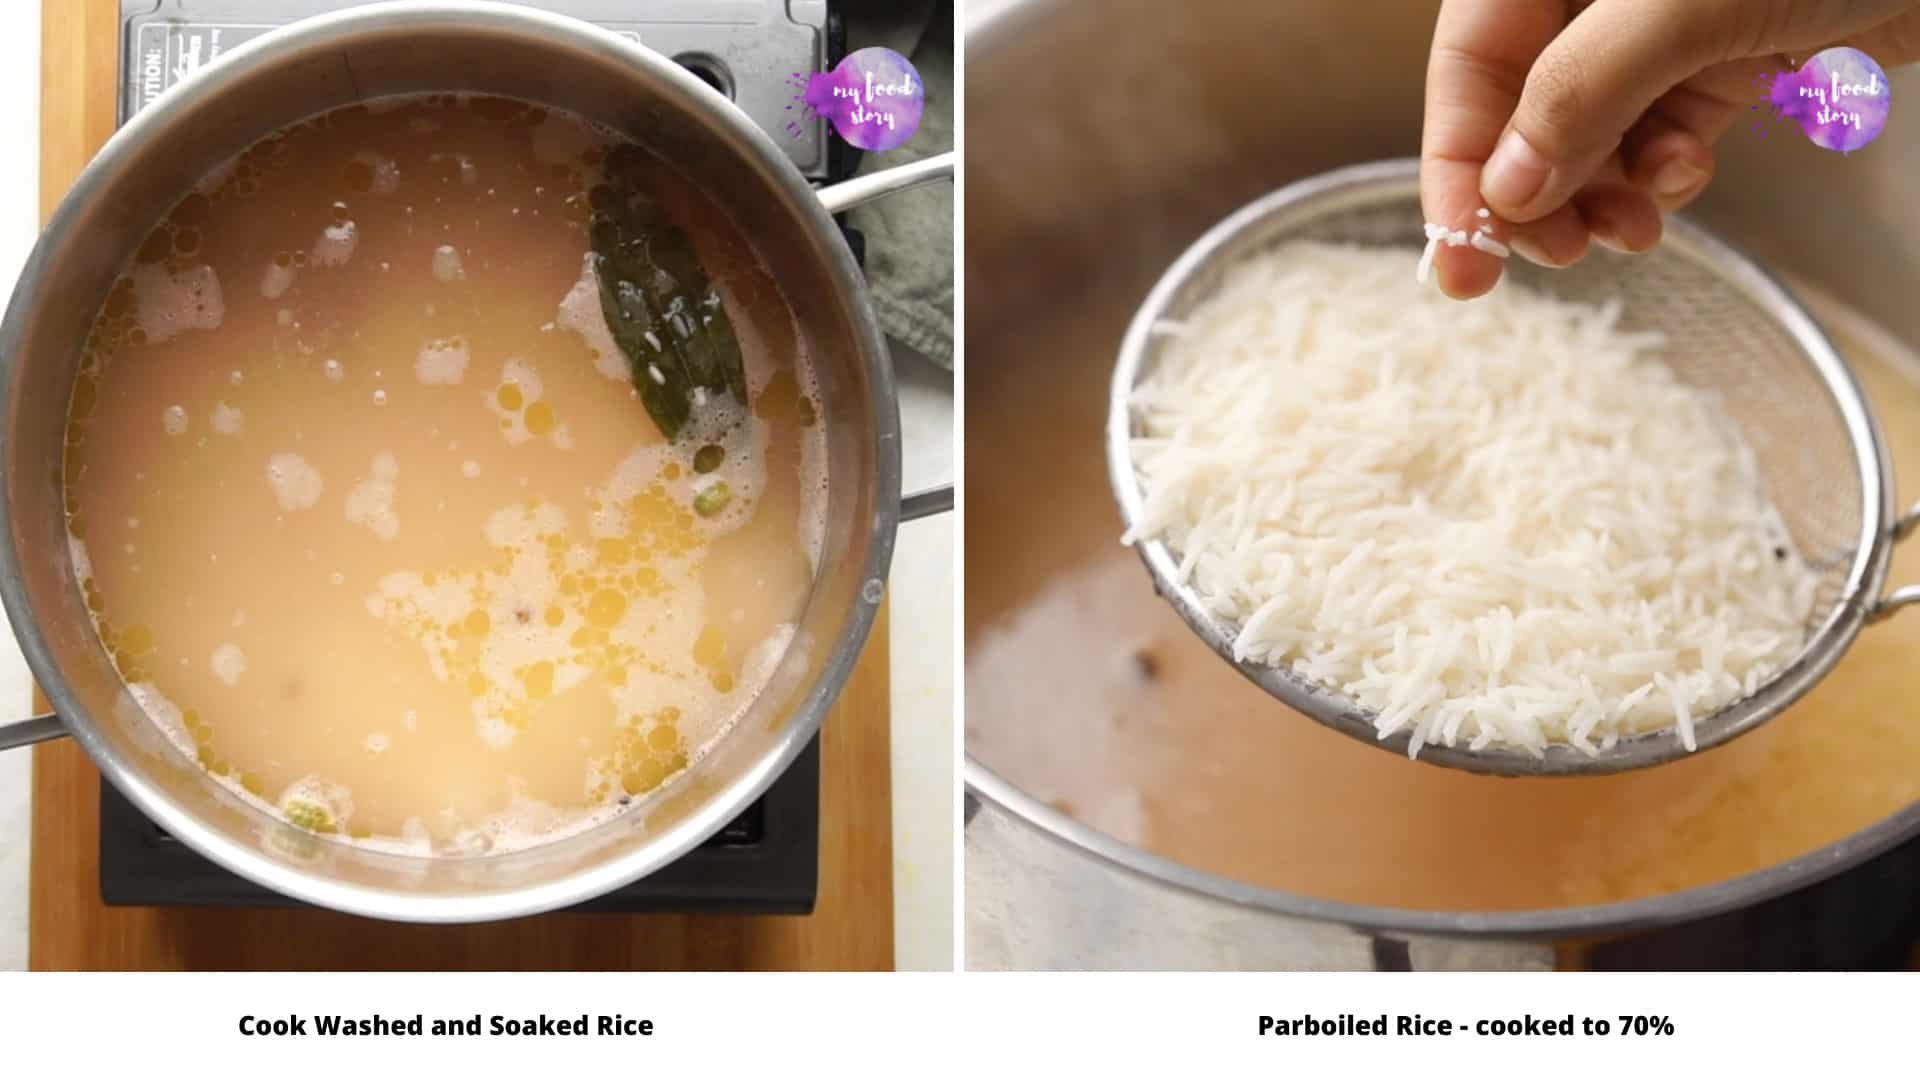 Step by step collage showing how to parboil rice to 70% doneness